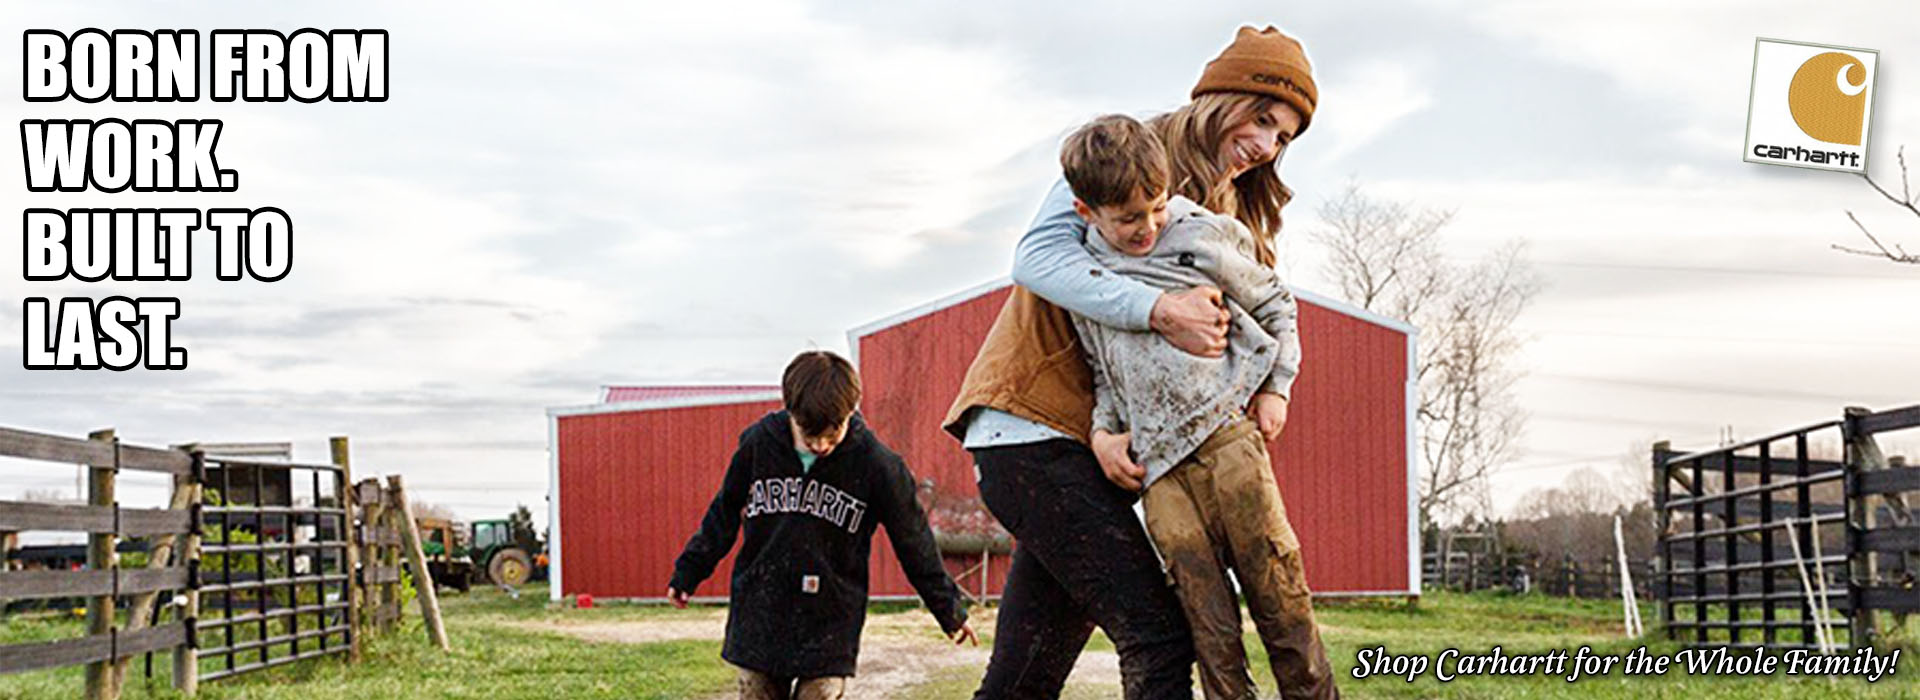 BORN FROM WORK. BUILT TO LAST. Shop Carhartt for the Whole Family!